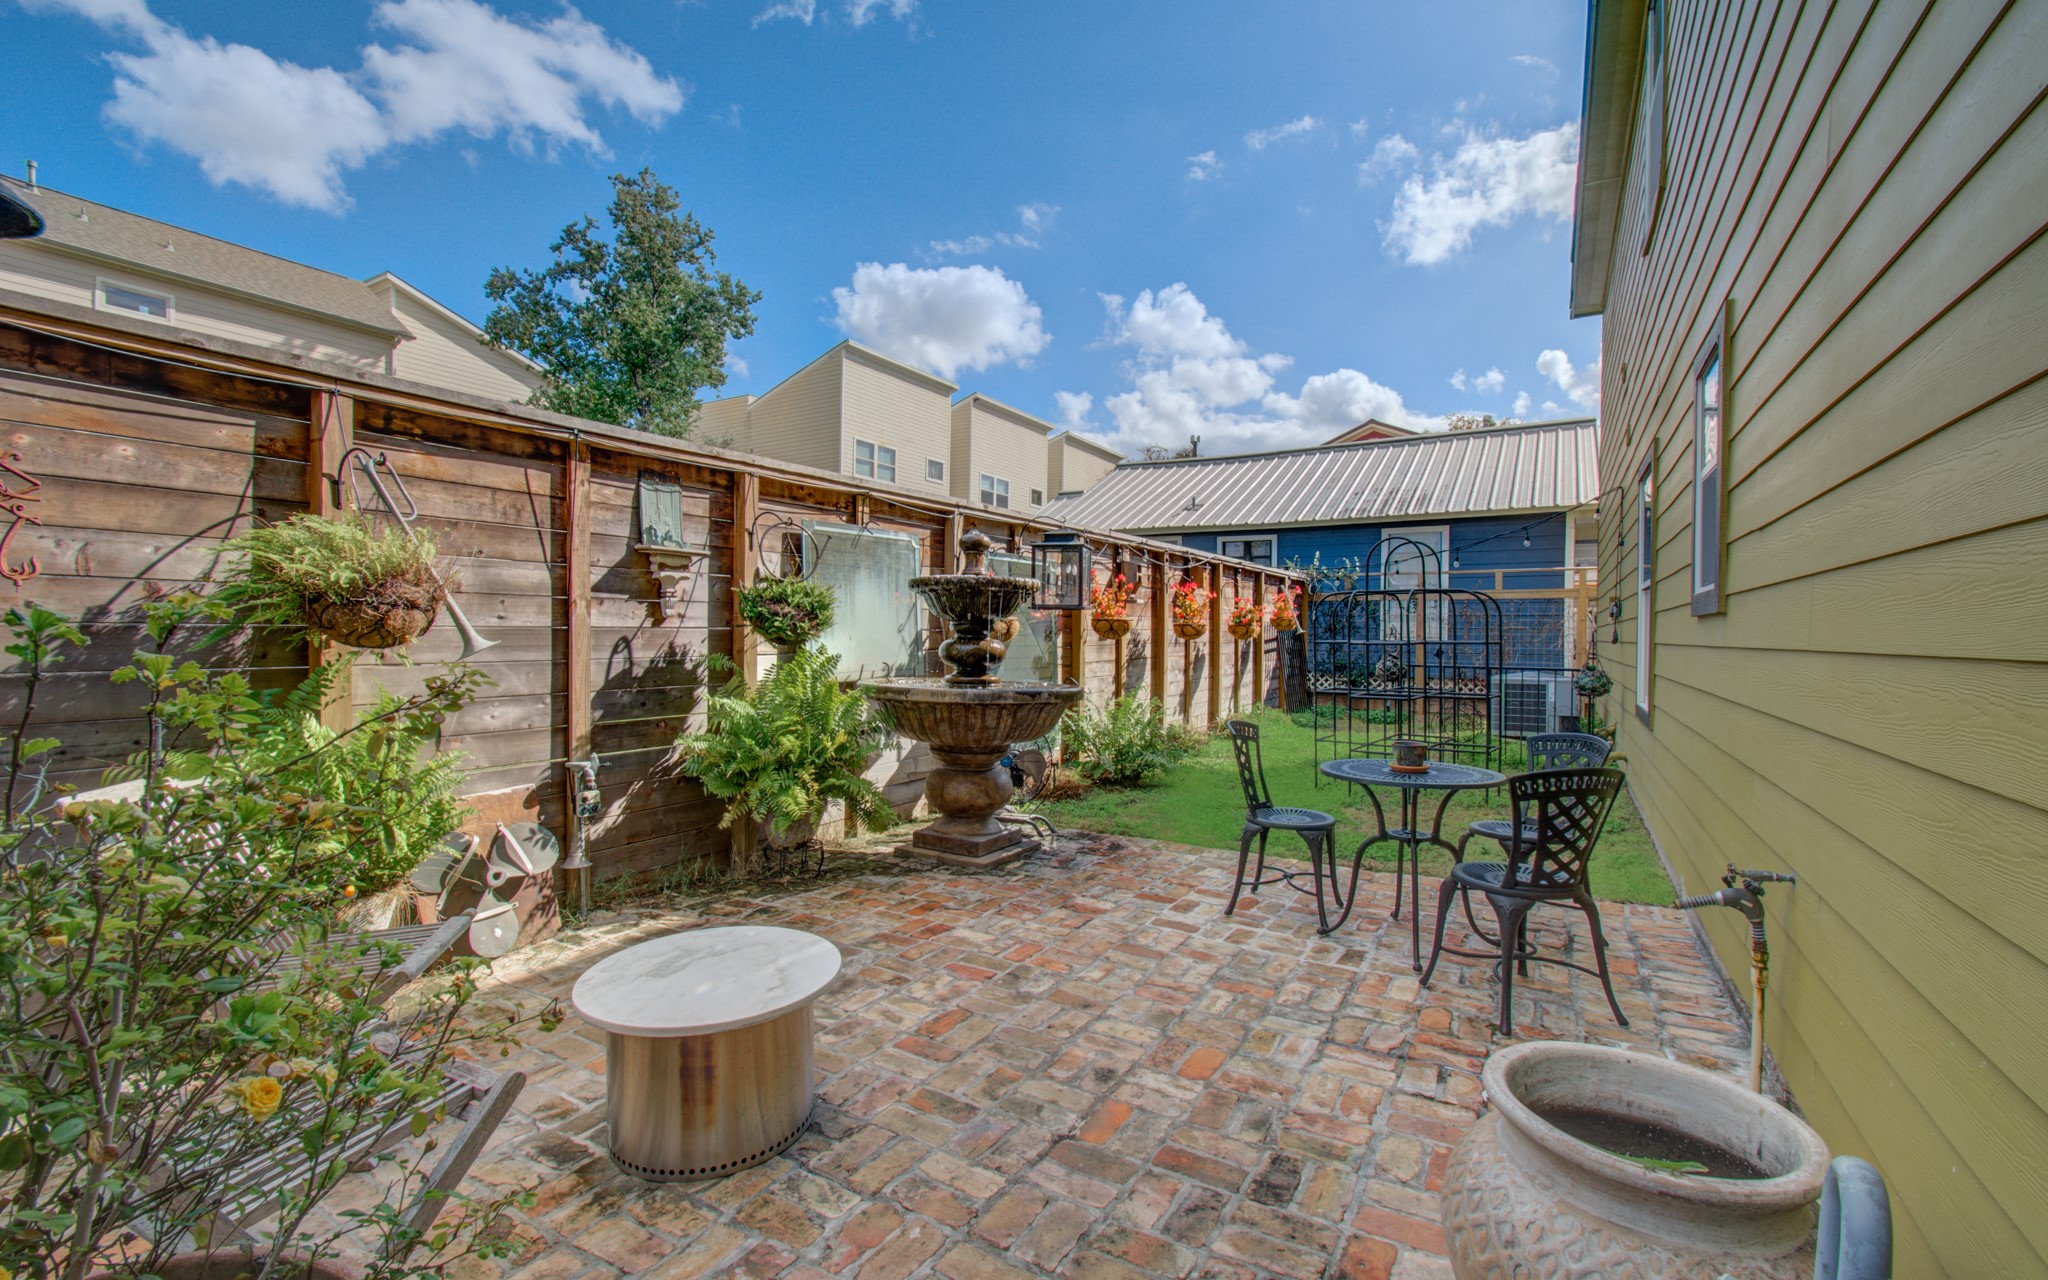 The owners expanded their outdoor living space by acquiring a 10x65 ft section of the adjacent lot, creating a serene side patio for added tranquility and enjoyment.